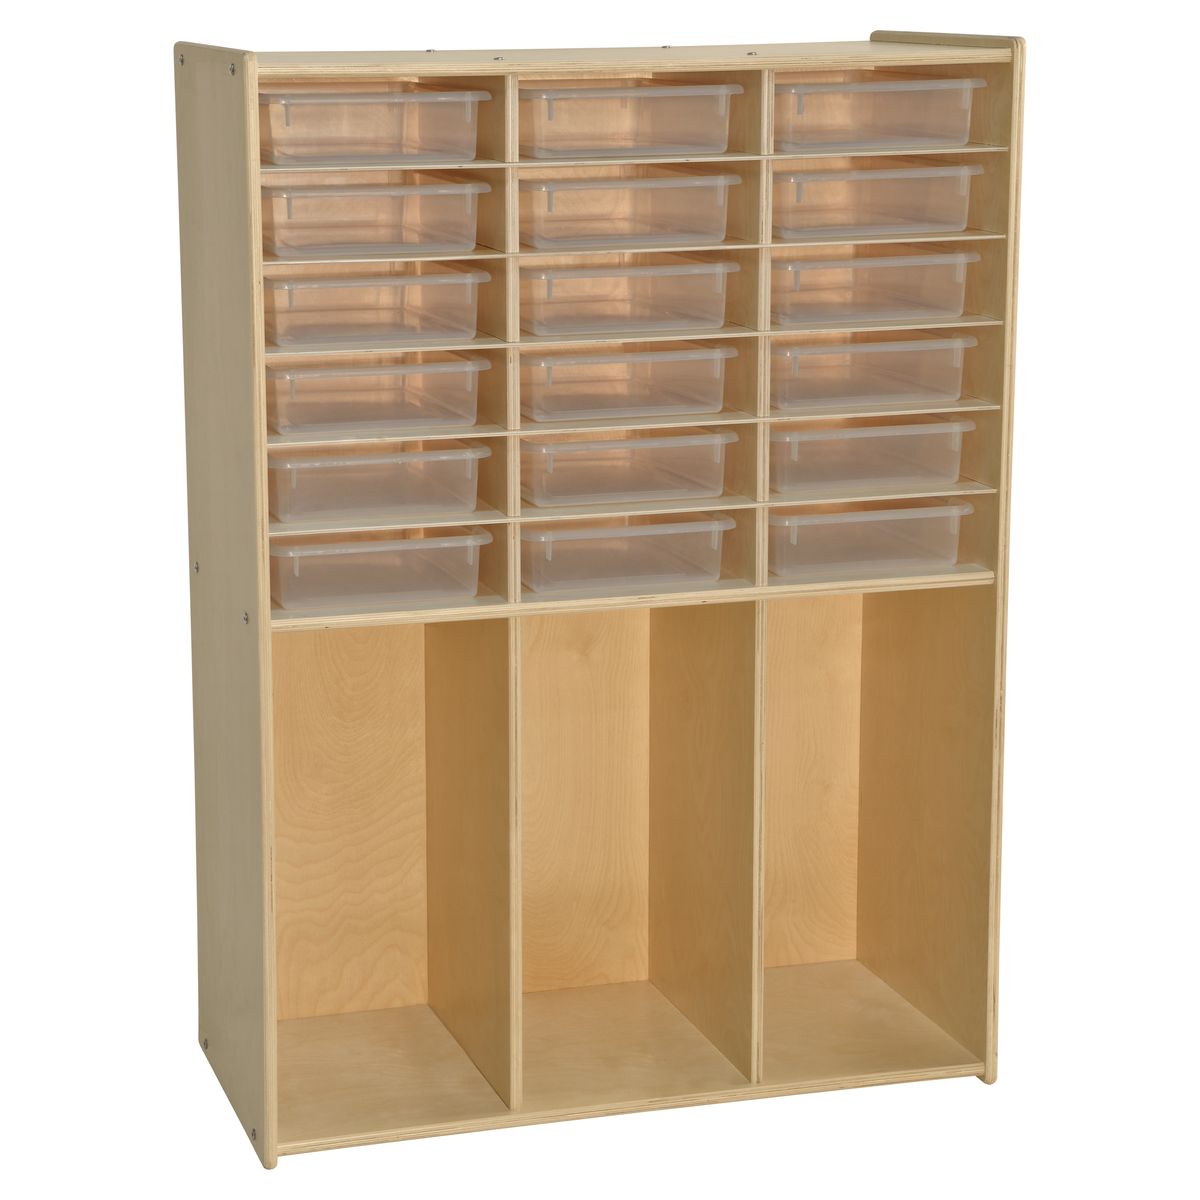 C990343-ct 18 Translucent Tray Storage With Cubbies - Rta